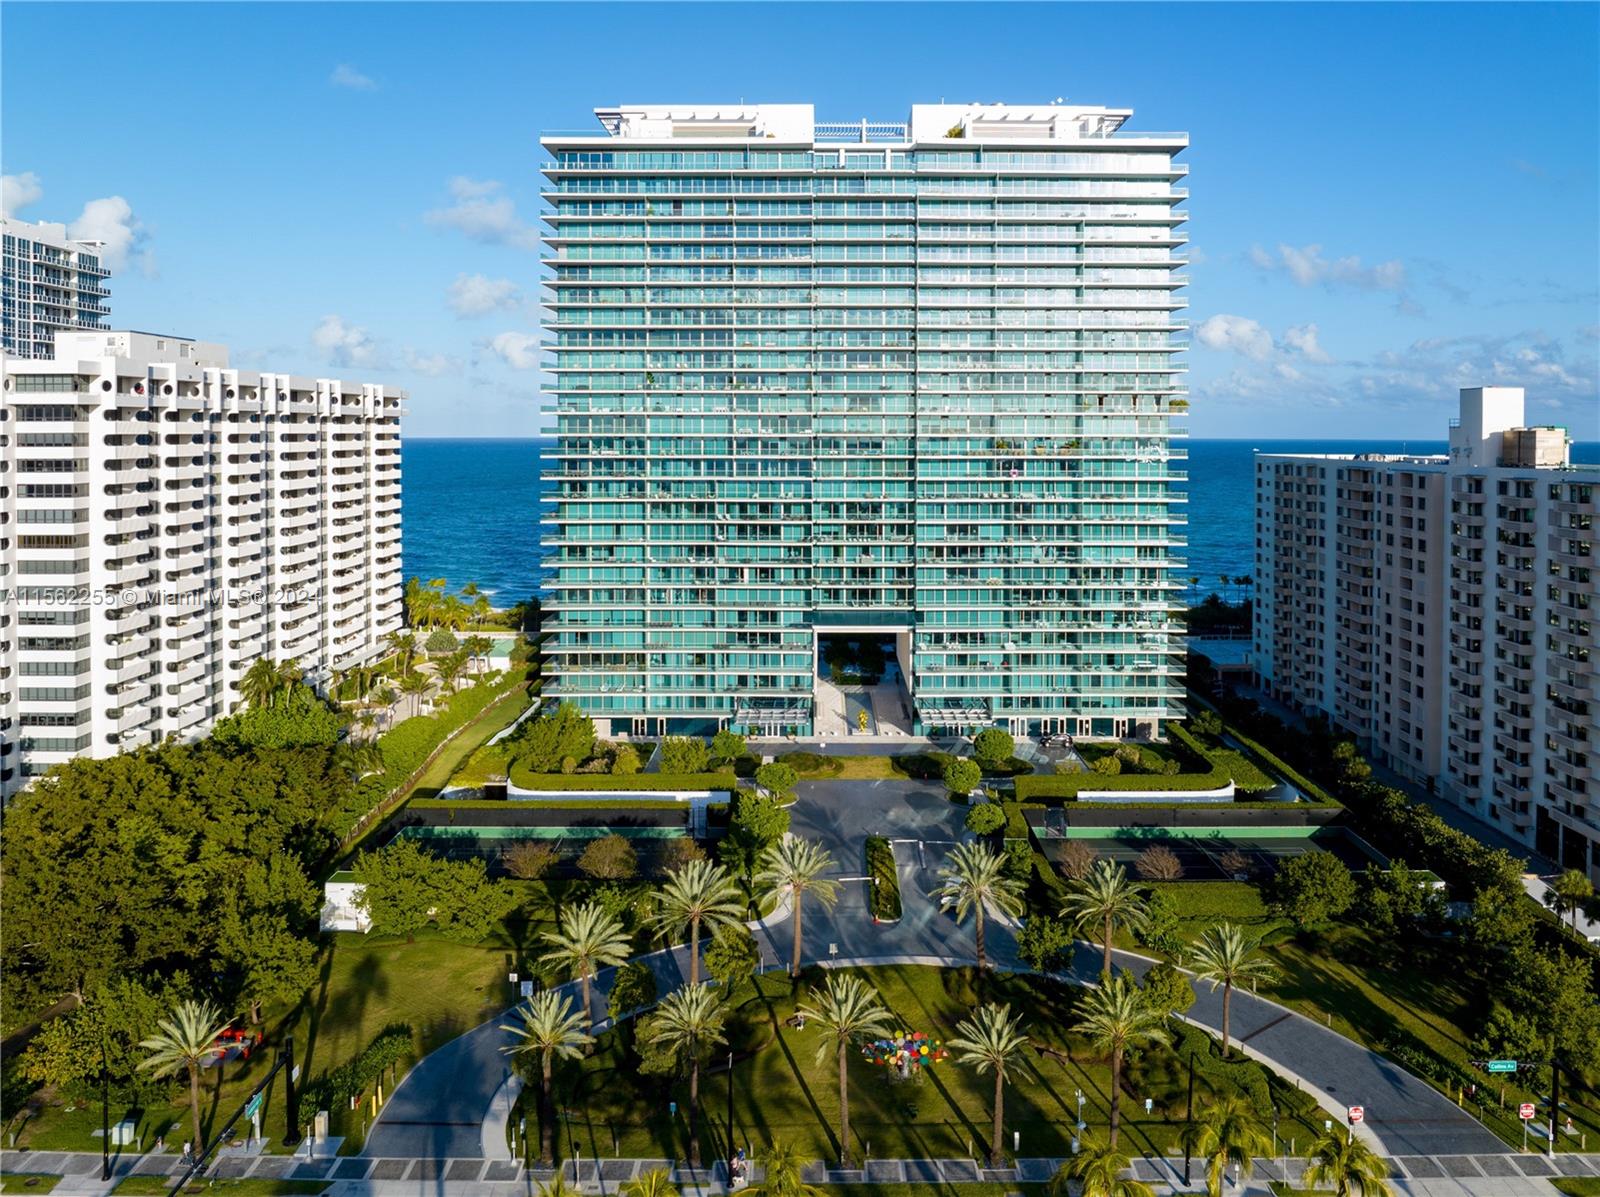 Experience luxury living at Oceana Bal Harbour. This stunning 1BR, 1.5BR located in Bal Harbour, features a private elevator entrance and a spacious terrace w/expansive views. Enjoy premium finishes, a state-of-the-art kitchen, and spa-style bathrooms. Flooded with natural light, thanks to floor-to-ceiling windows and 10' ceilings. 
World-class amenities, from beachfront services to a poolside retreat and a fully equipped spa and fitness center. The property spans 4.8 acres, 2 tennis courts, cabanas, cinema and dedicated children's area. 
With its spacious balconies and panoramic city and bay views, this fully FURNISHED unit promises a lavish living experience. 24-hour concierge, valet parking, pet care facilities, and a unique art exhibition embodying the epitome of Oceana Bal Harbour.